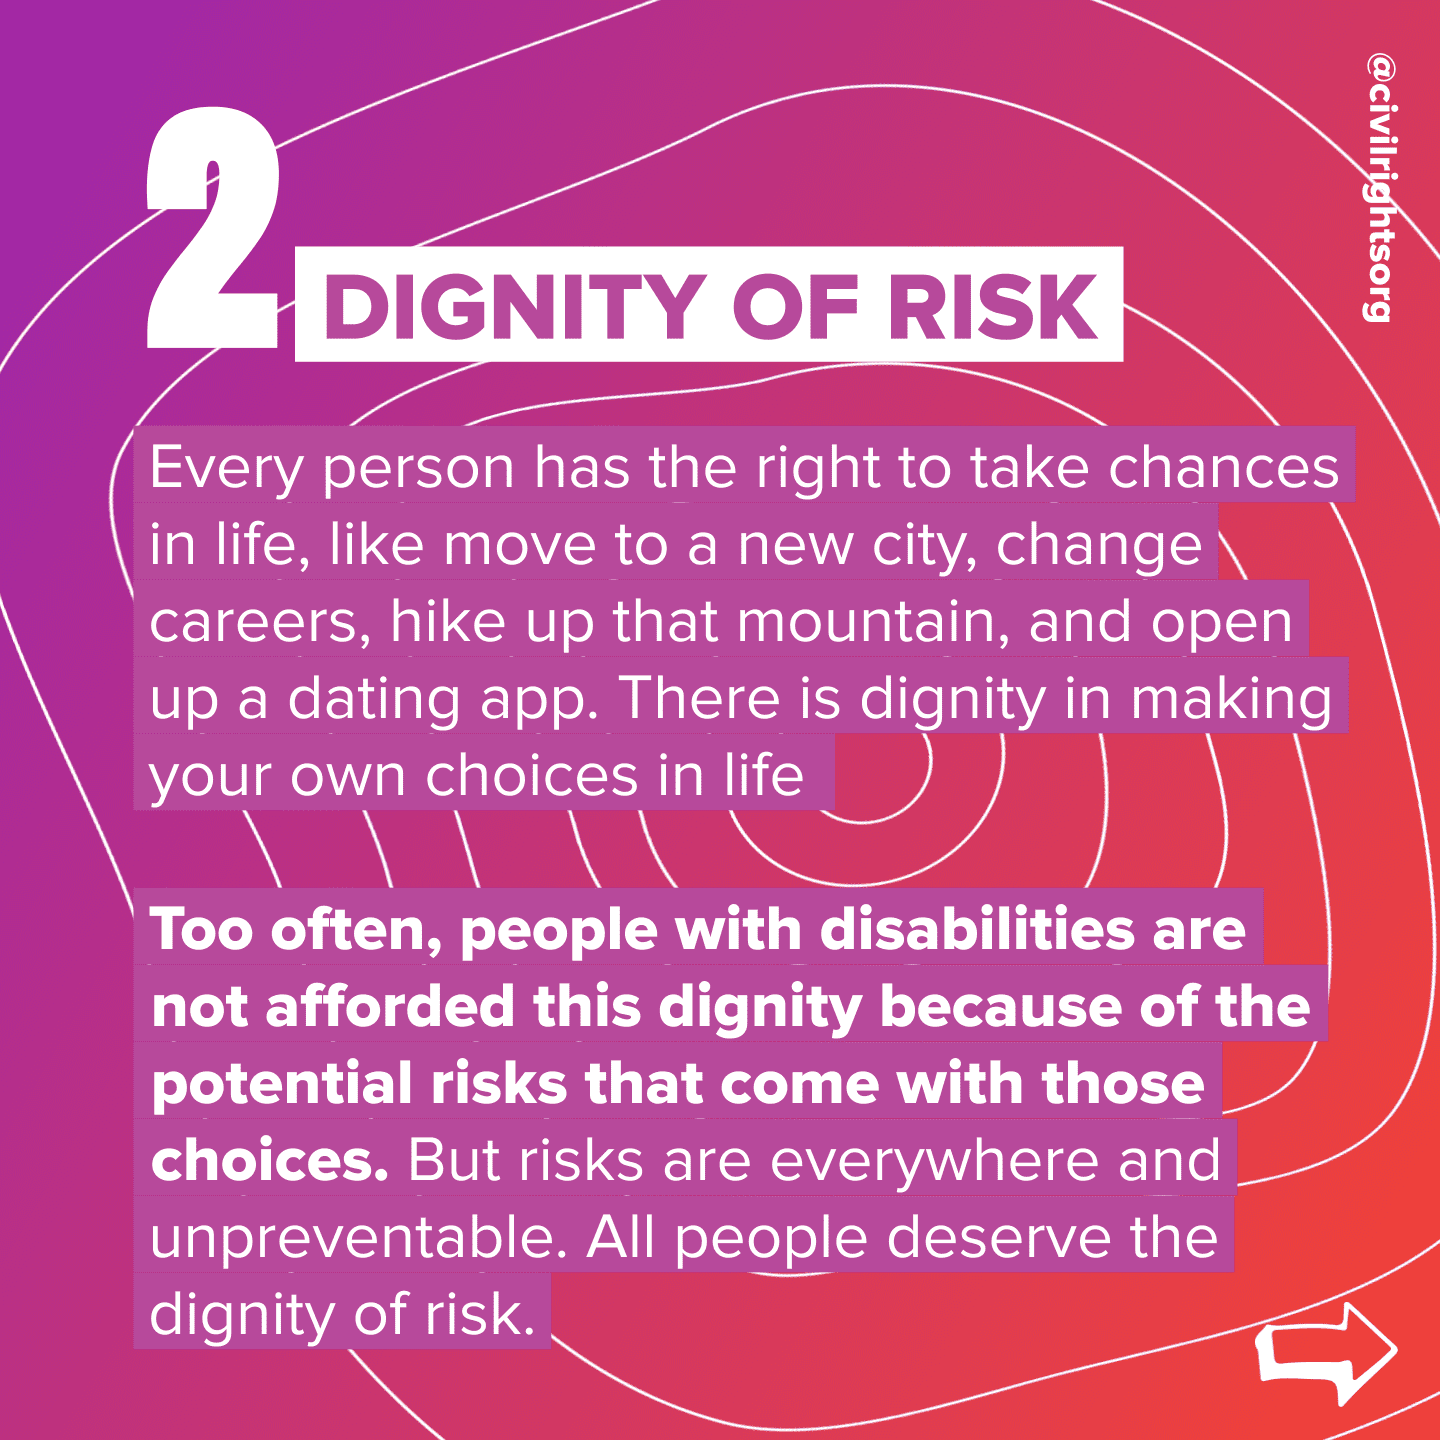 Number 2. Title “Dignity of Risk,” Every person has the right to take chances in life, like move to a new city, change careers, hike up that mountain, and open up a dating app. There is dignity in making your own choices in life. Too often, people with disabilities are not afforded this dignity because of the potential risks that come with those choices. But risks are everywhere and unpreventable. All people deserve the dignity of risk. Swipe right arrow.